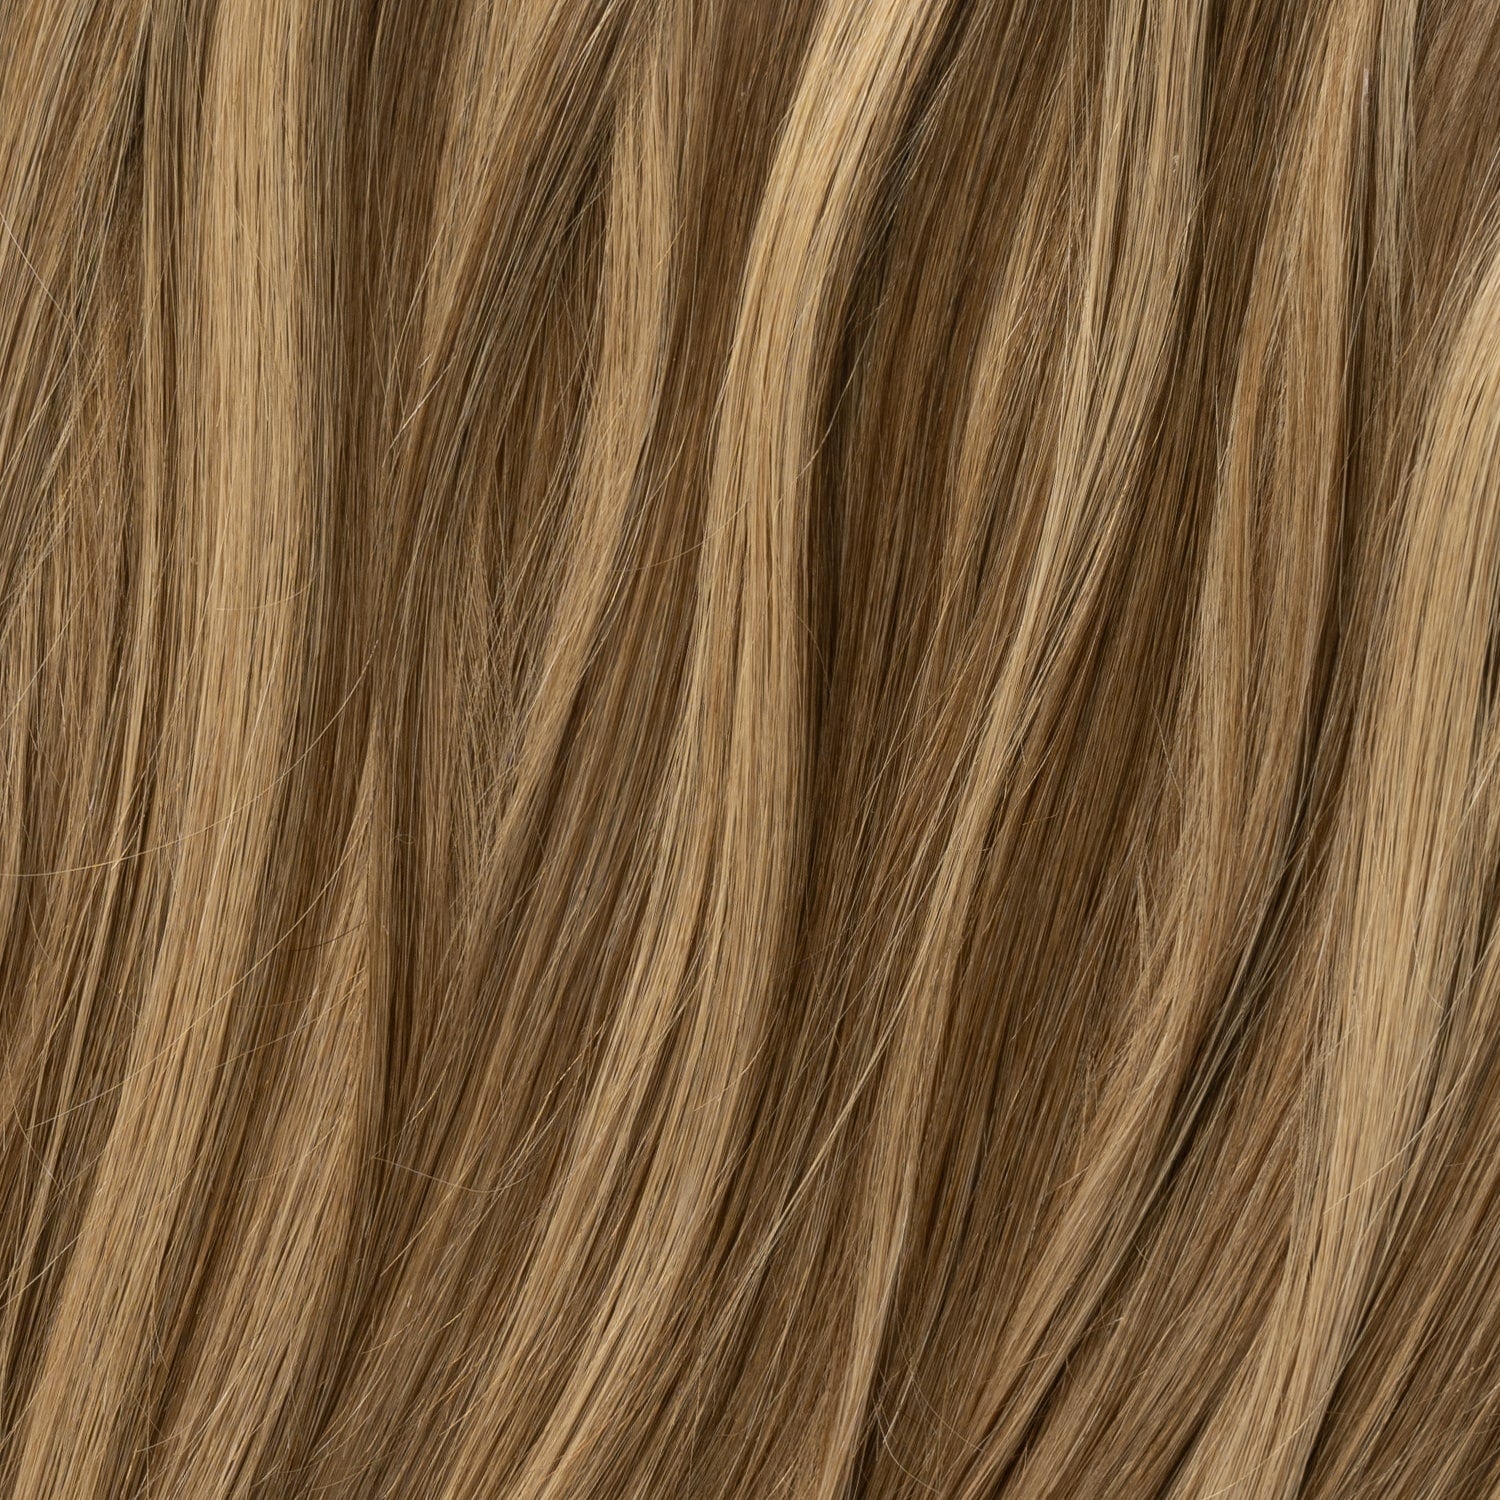 Halo hair extensions - Natural Brown Mix 3/10